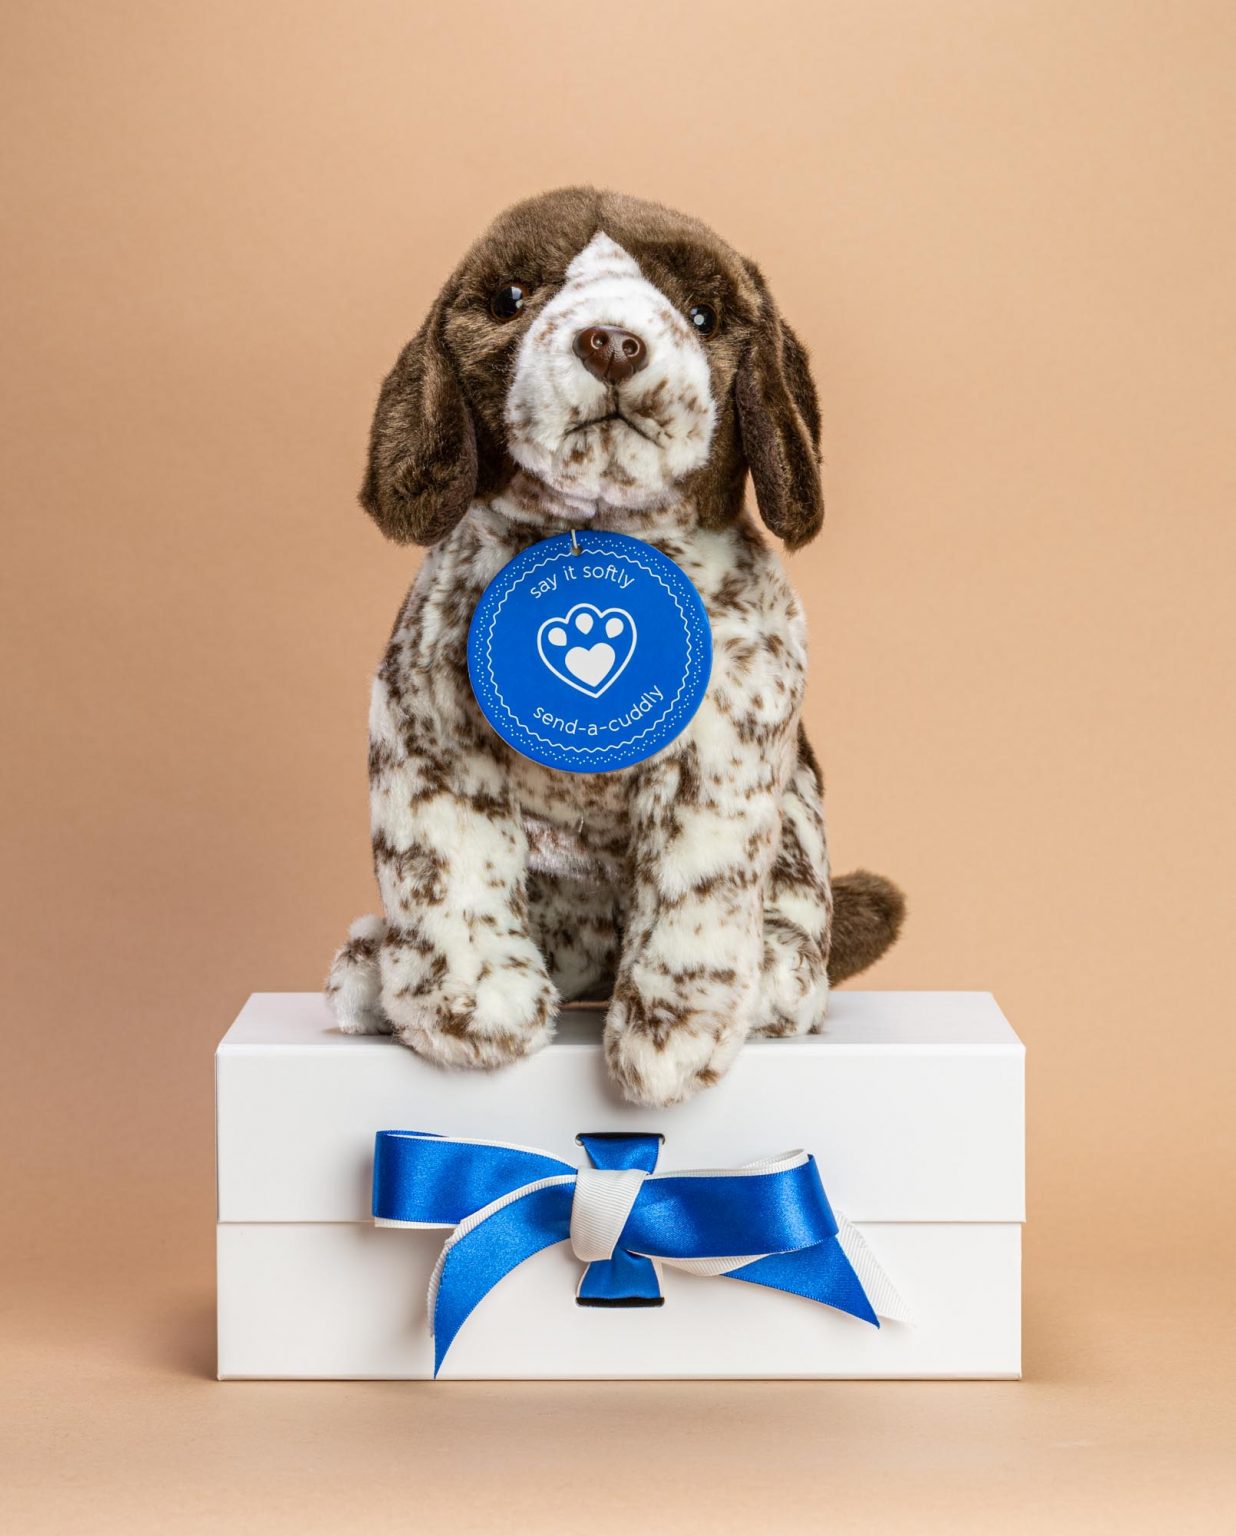 German Shorthaired Pointer Dog Soft Toy Gift - Send a Cuddly